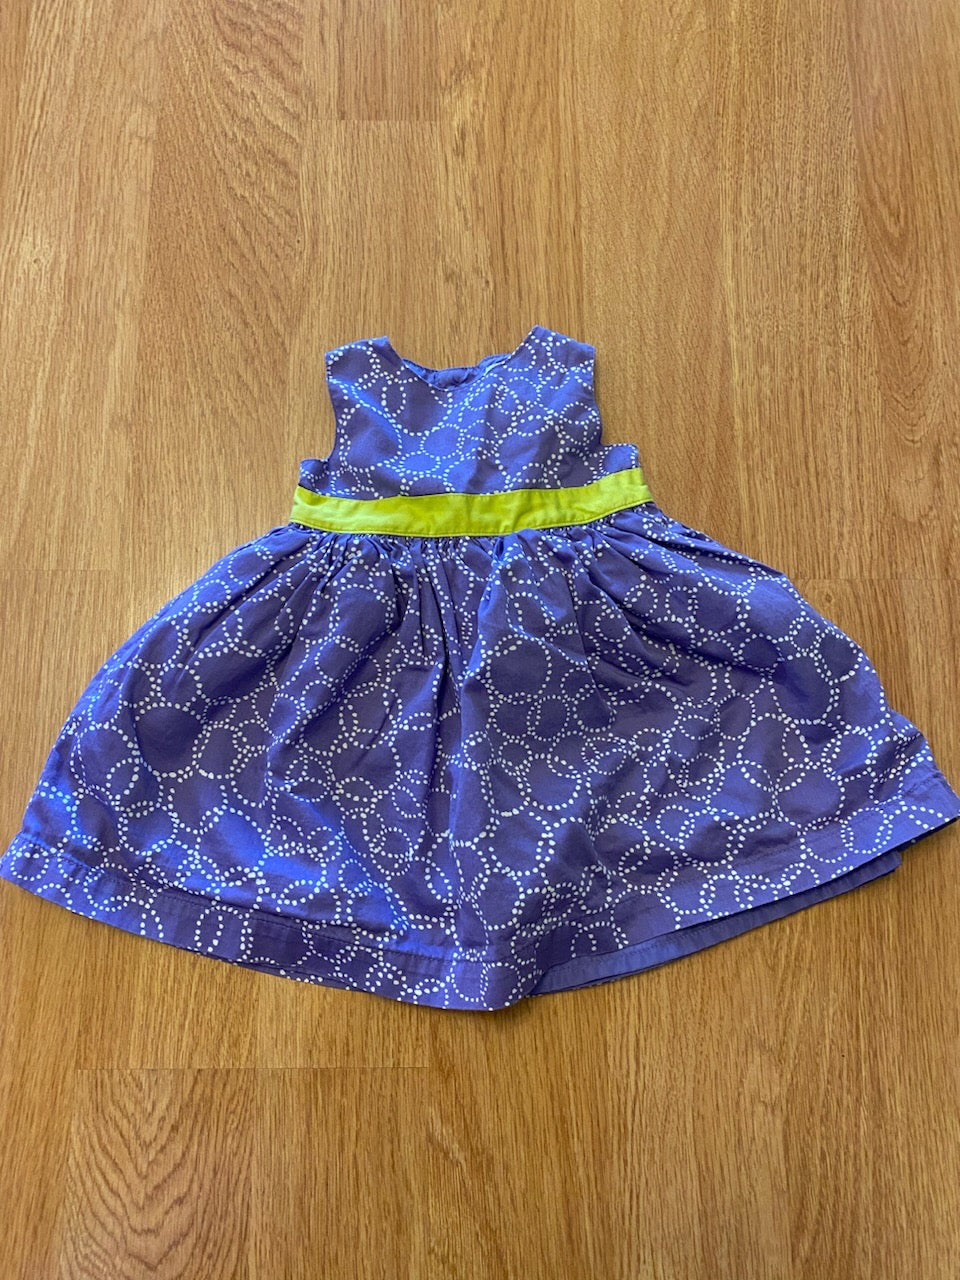 Carters Purple Dress with Lime Green Tie Size  9 months